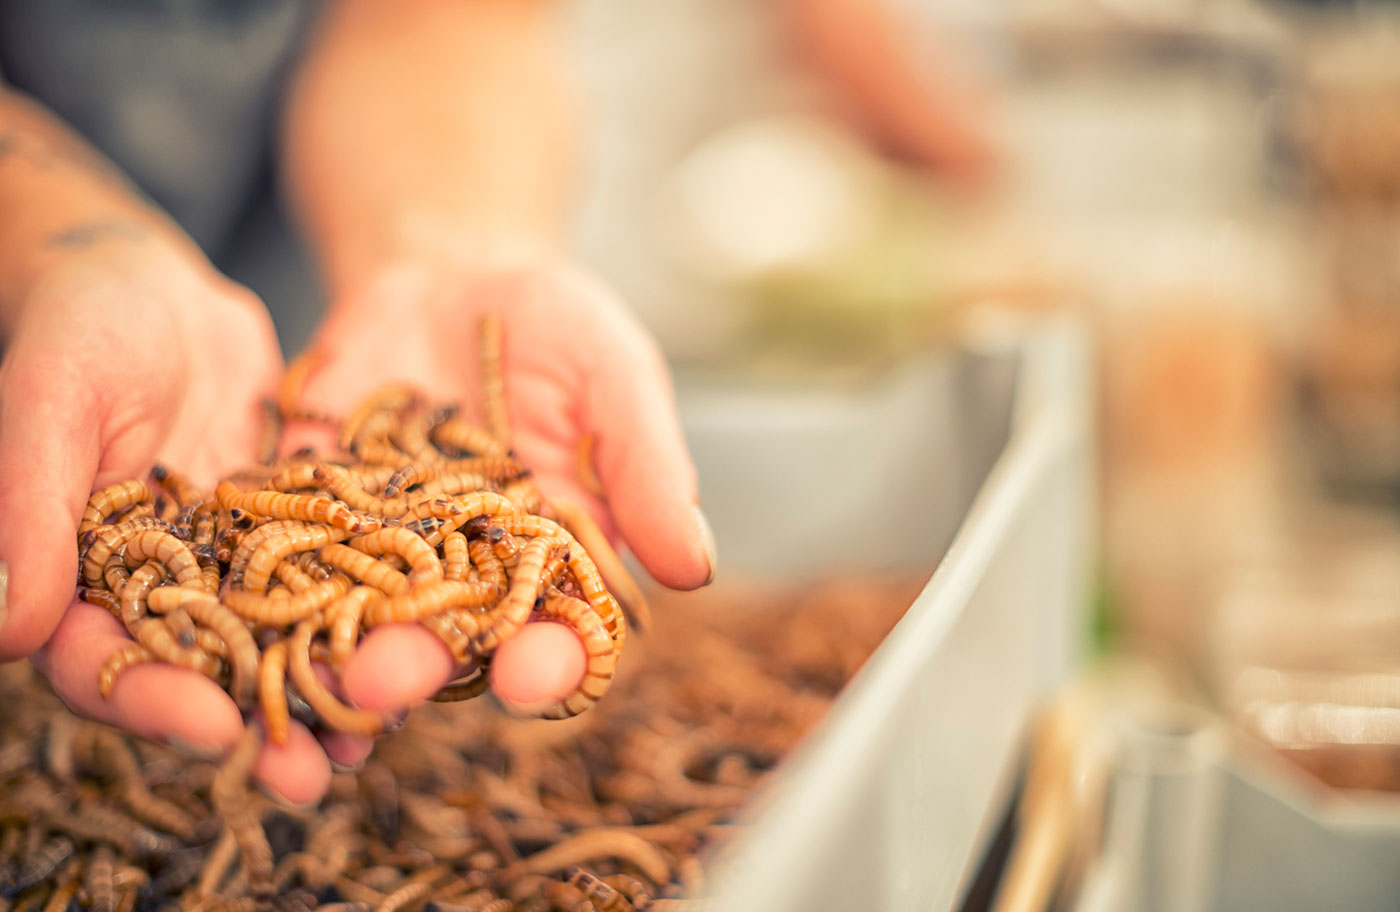 Insect farming – achieving a sustainable food cycle